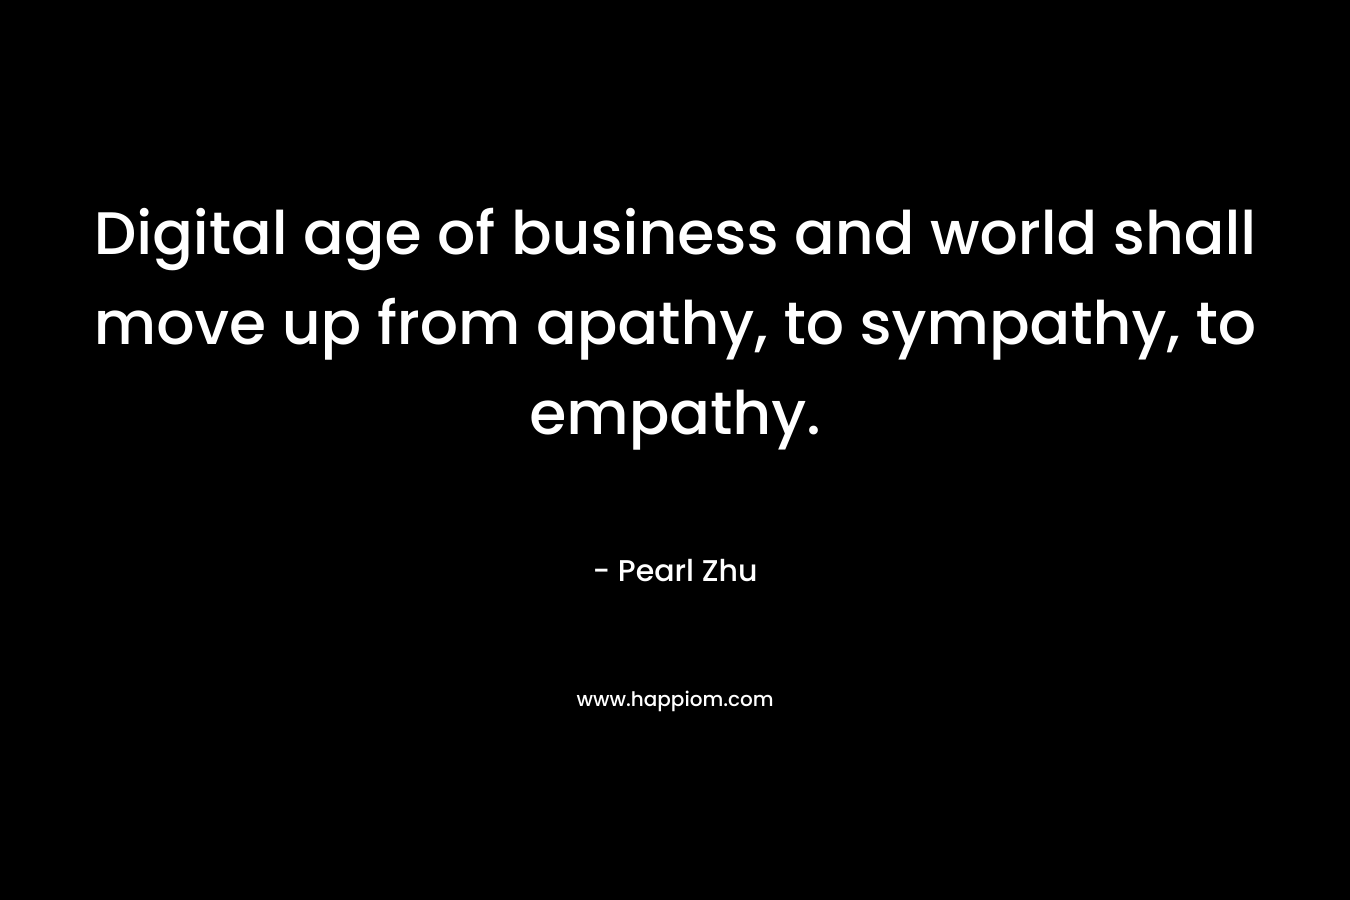 Digital age of business and world shall move up from apathy, to sympathy, to empathy.